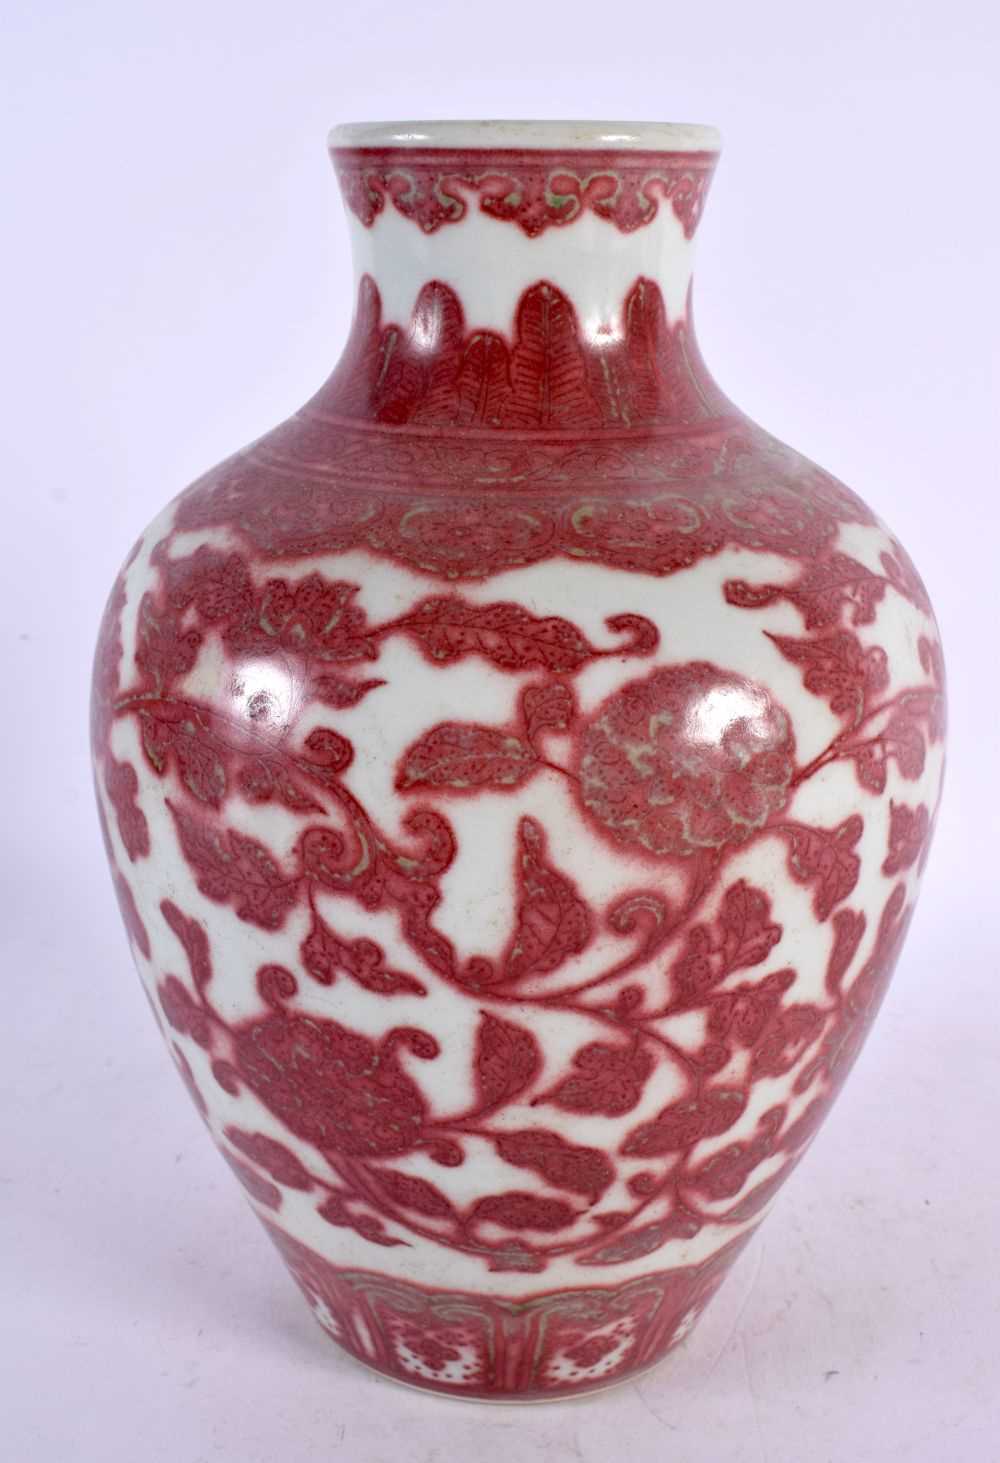 A CHINESE IRON RED PORCELAIN VASE 20th Century, painted in the Ming style. 24 cm x 12 cm.